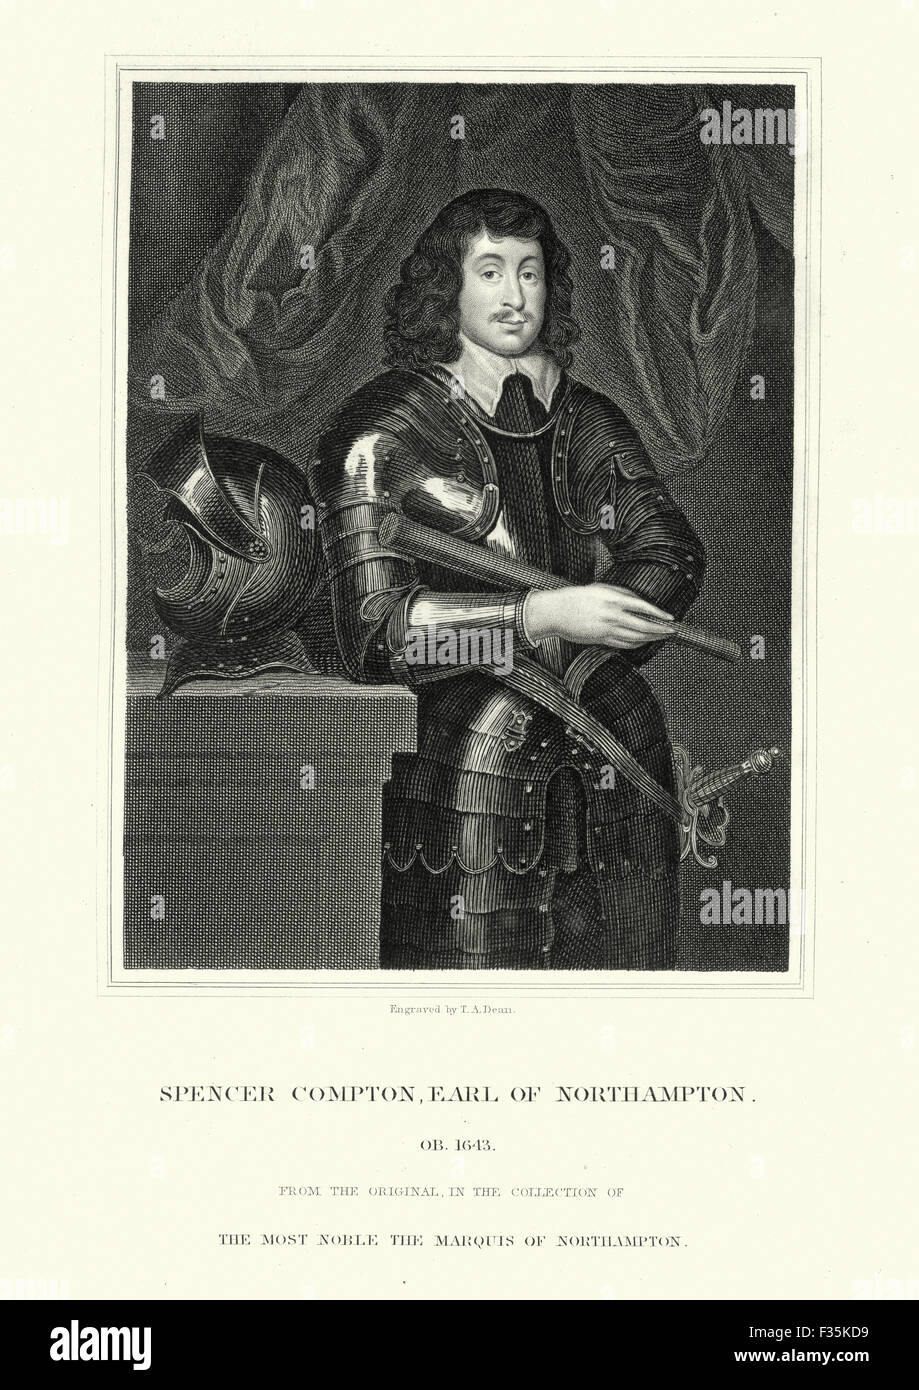 Portrait of Spencer Compton, 2nd Earl of Northampton, an English soldier and politician. He fought in the Royalist army and was Stock Photo